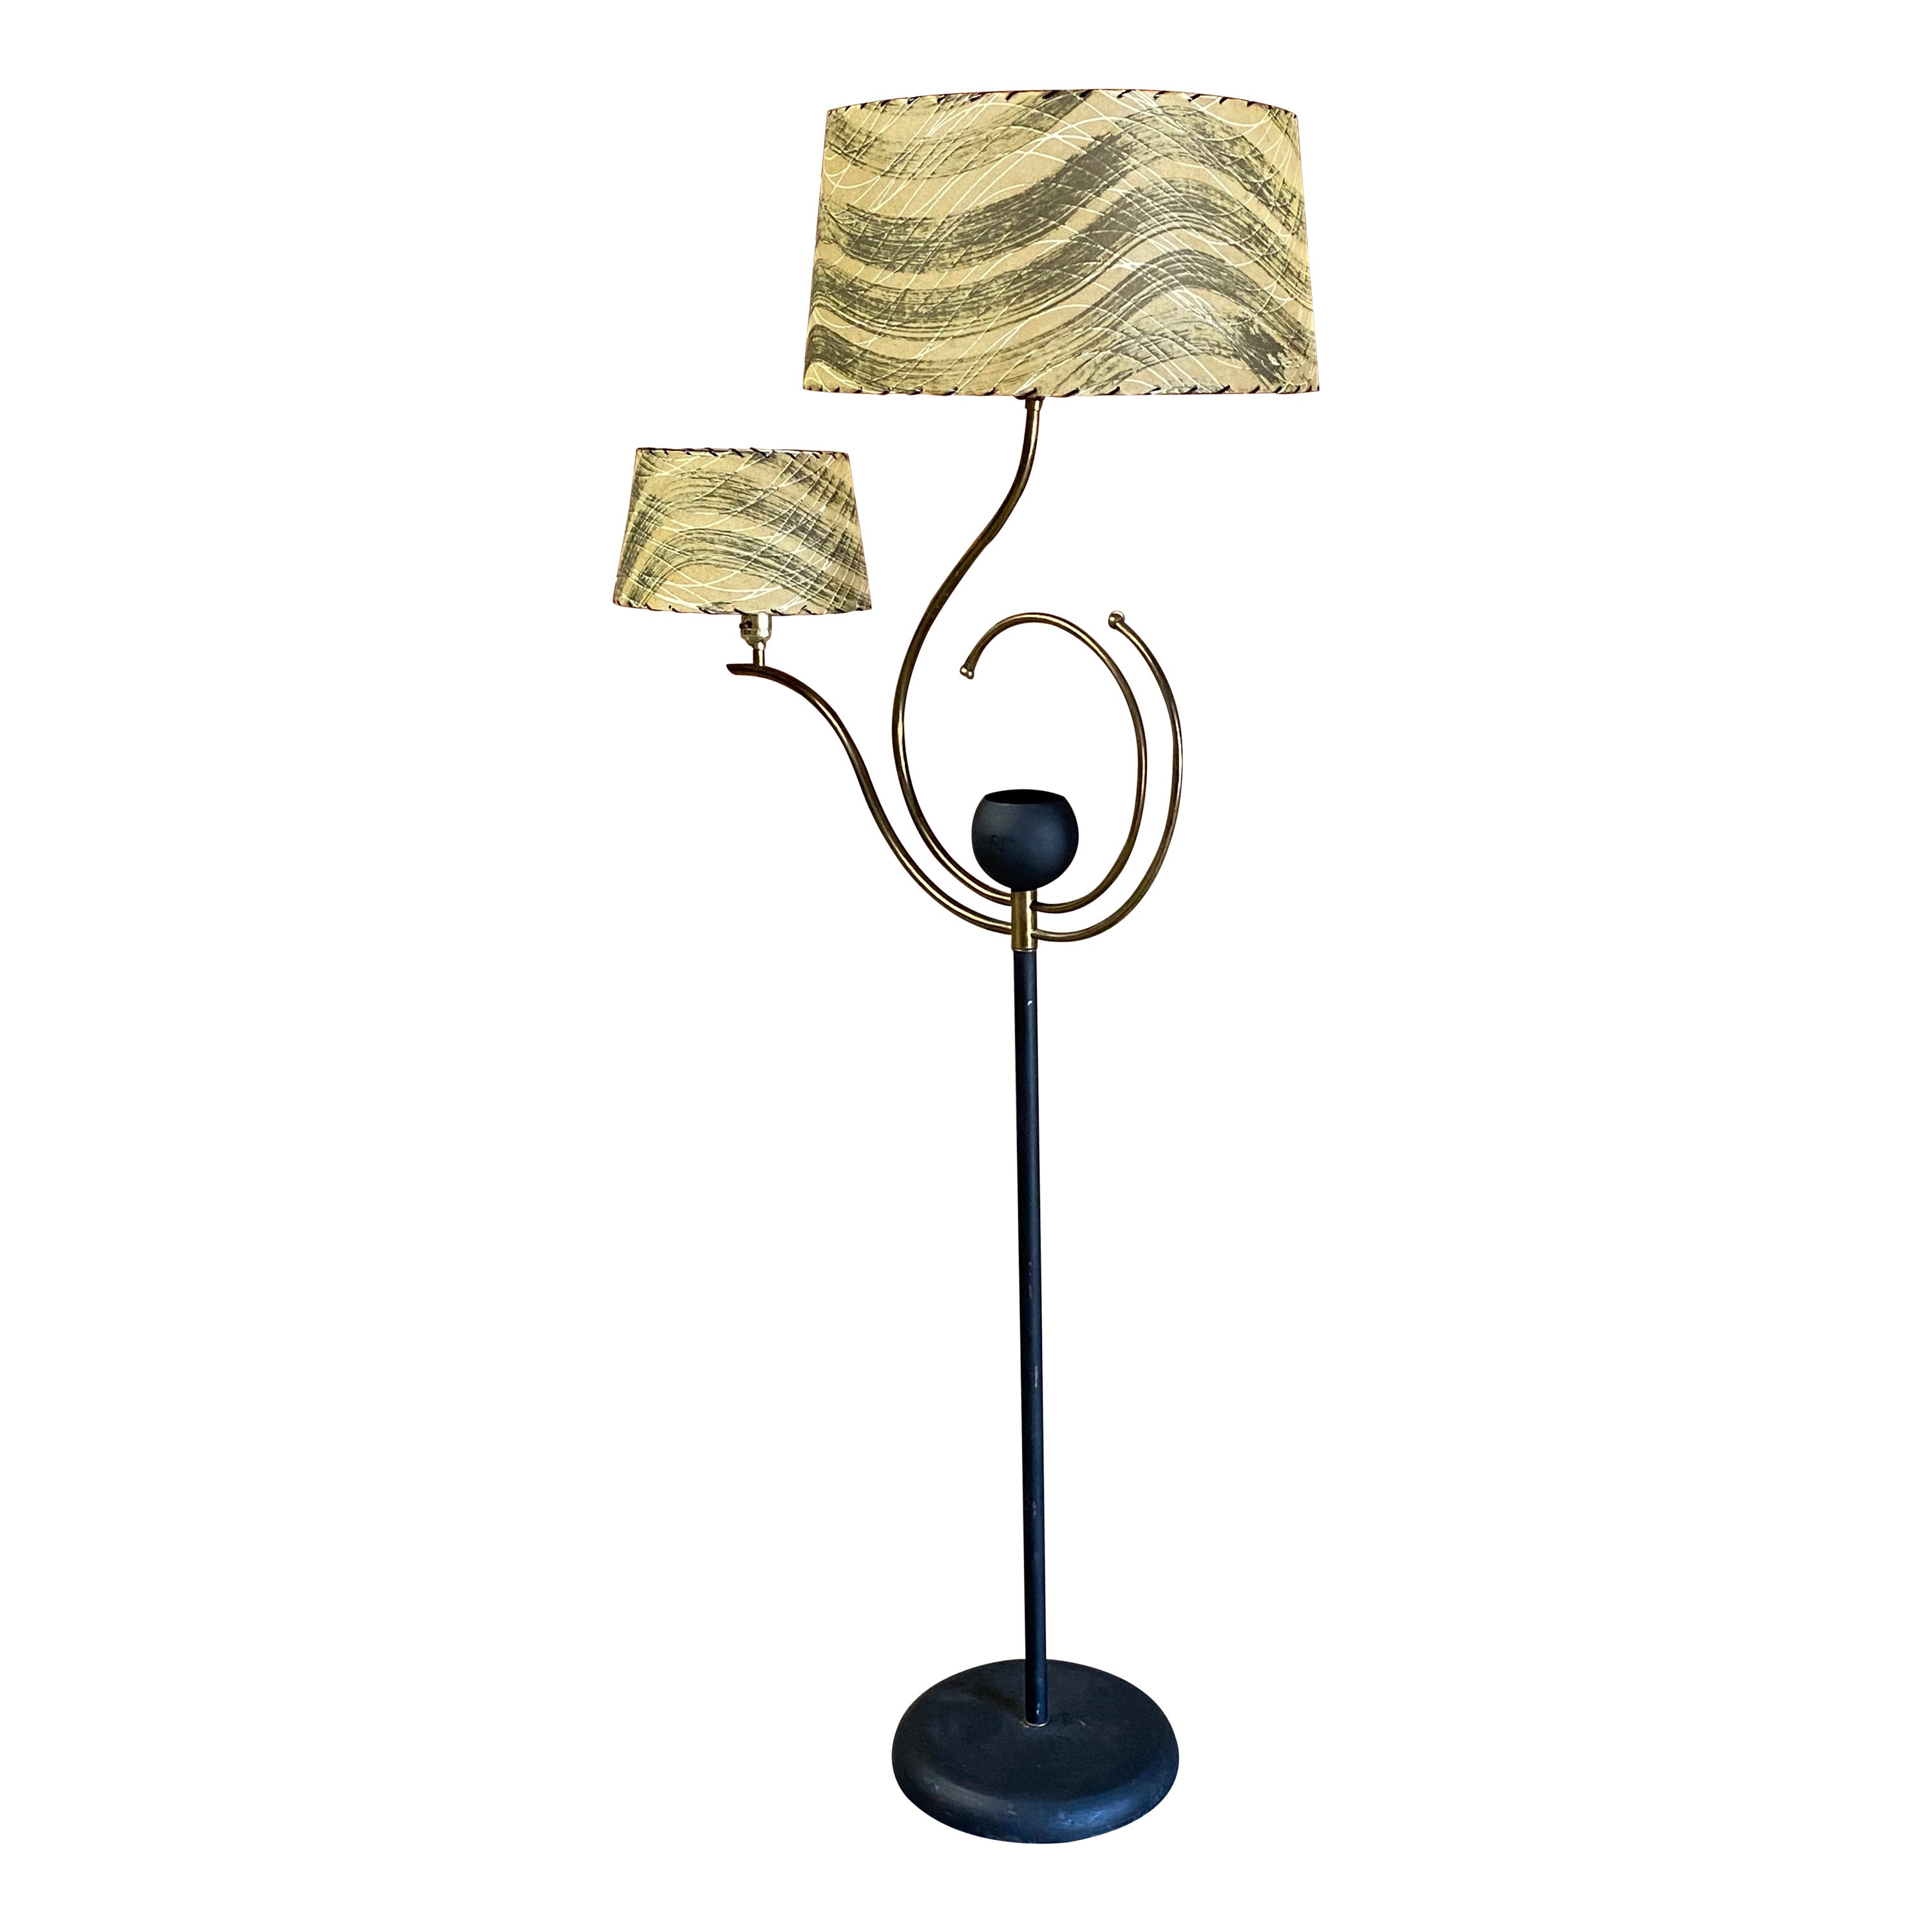 1950s Majestic Style Floor Lamp with Whip Stitch Shades For Sale at 1stDibs